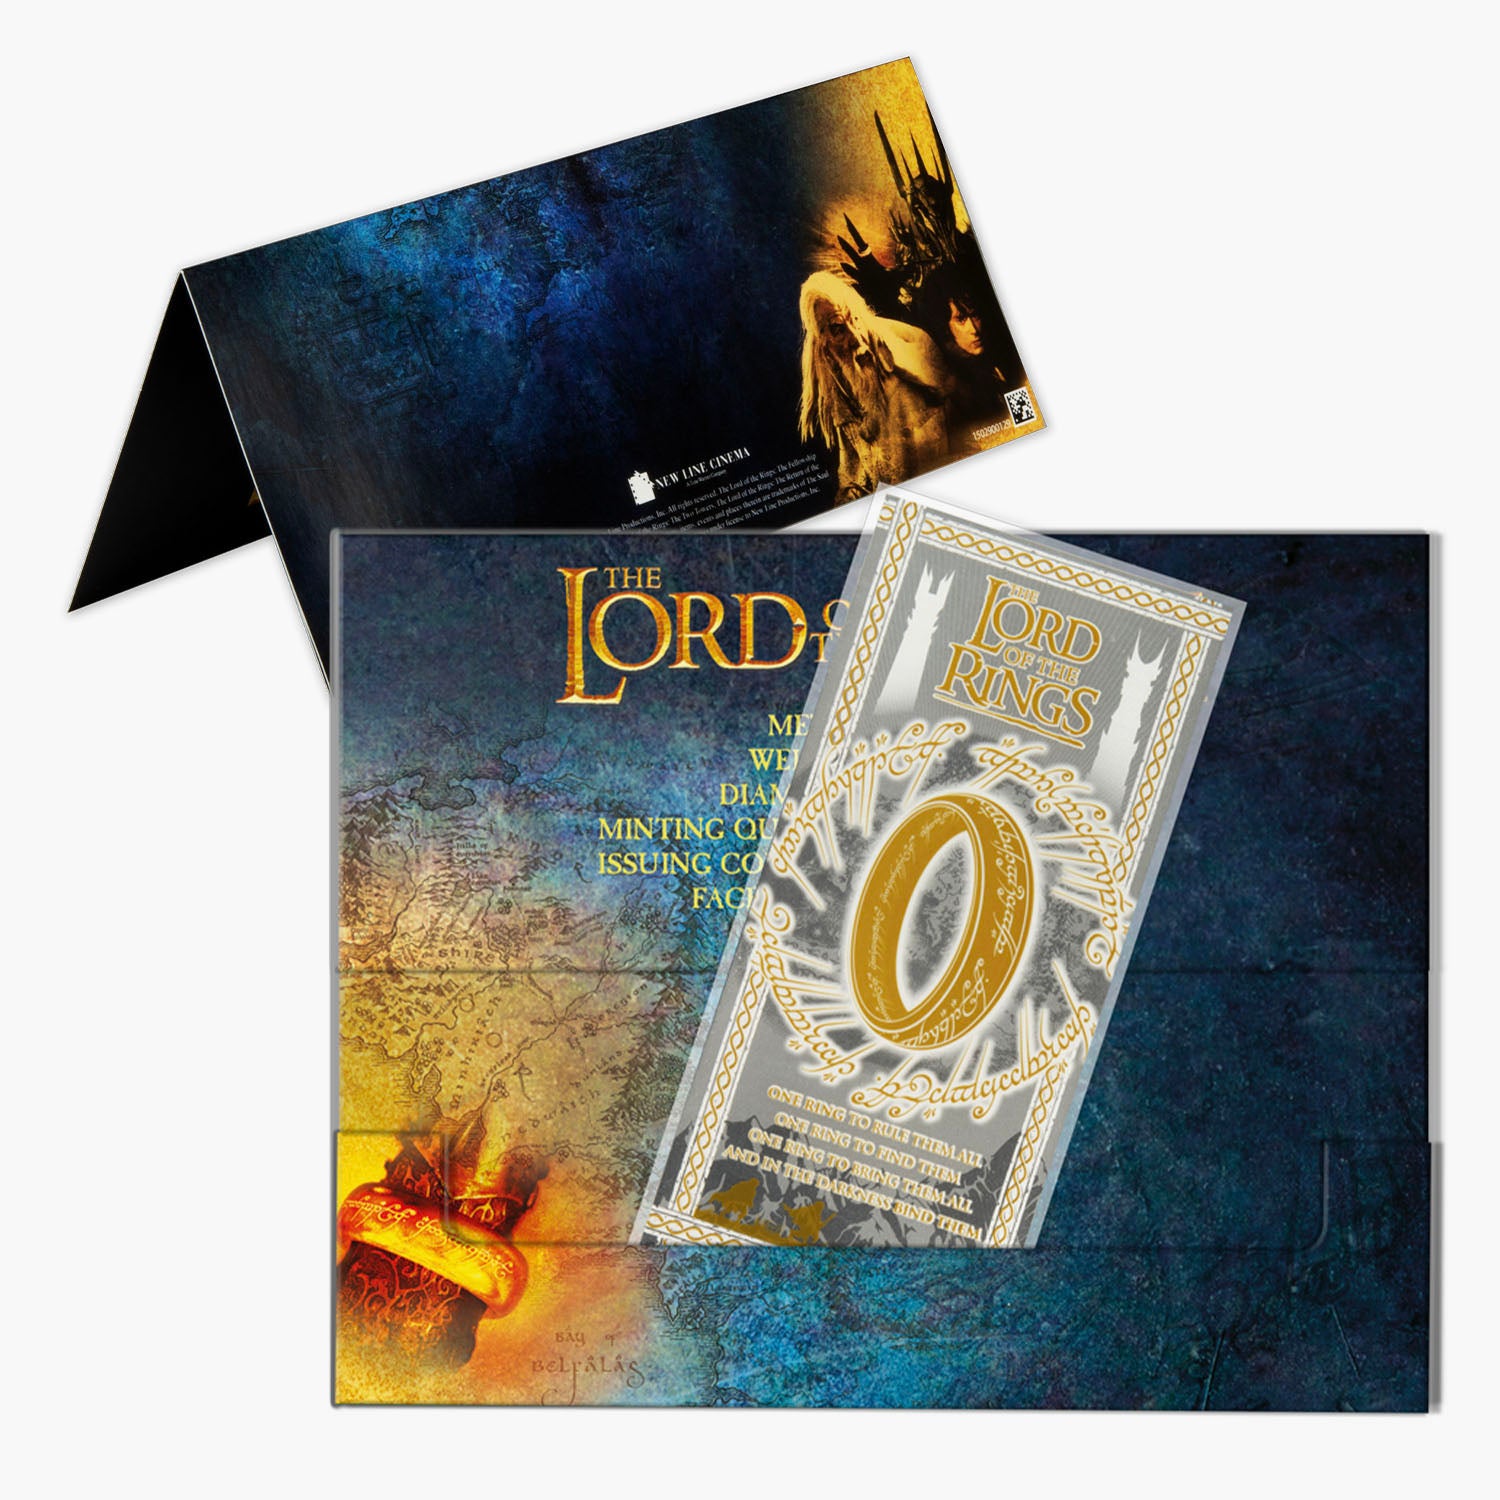 The Official Lord of the Rings Pure Silver Legal Tender Note